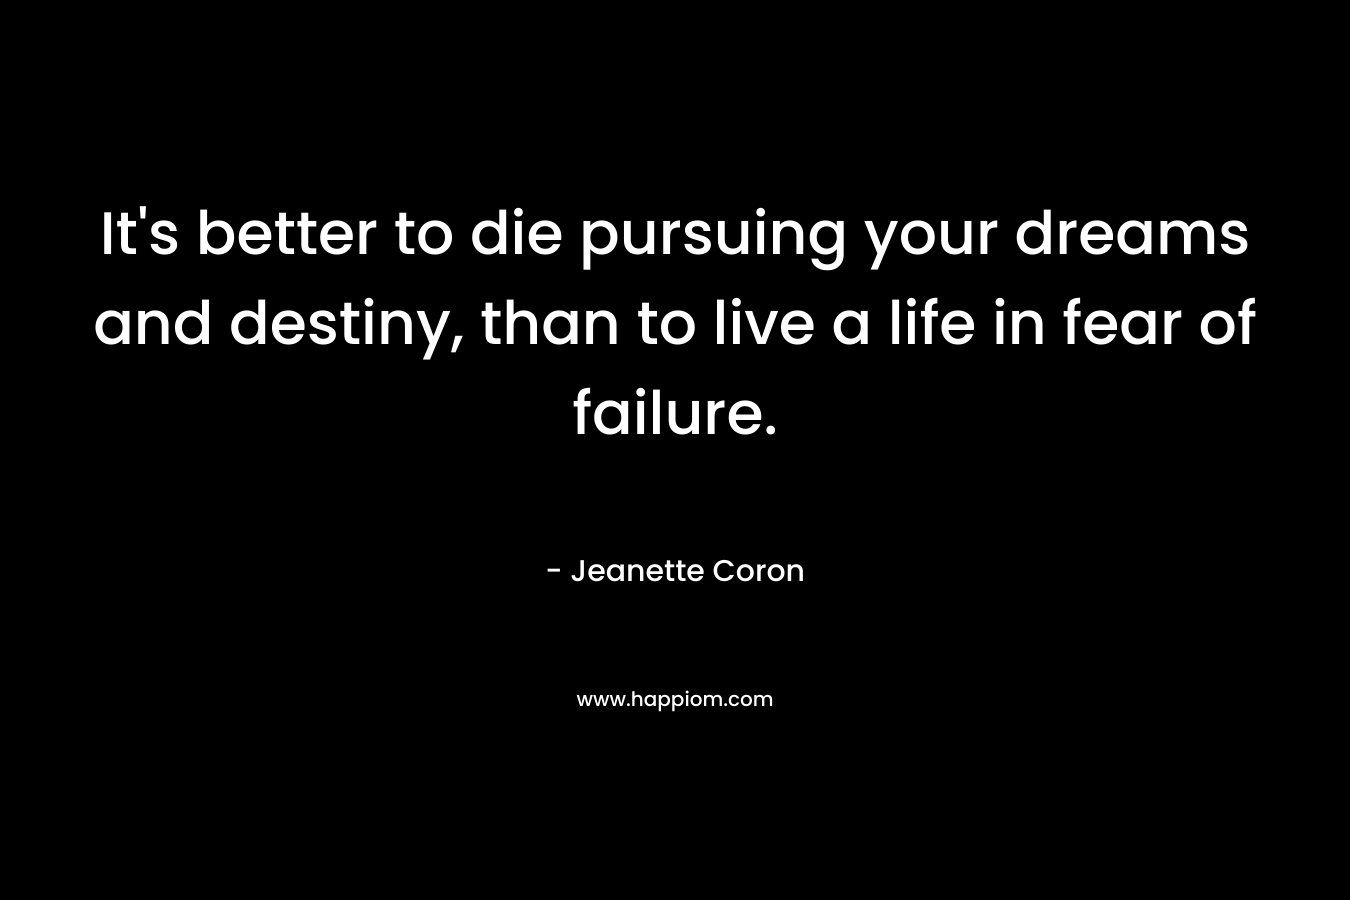 It's better to die pursuing your dreams and destiny, than to live a life in fear of failure.